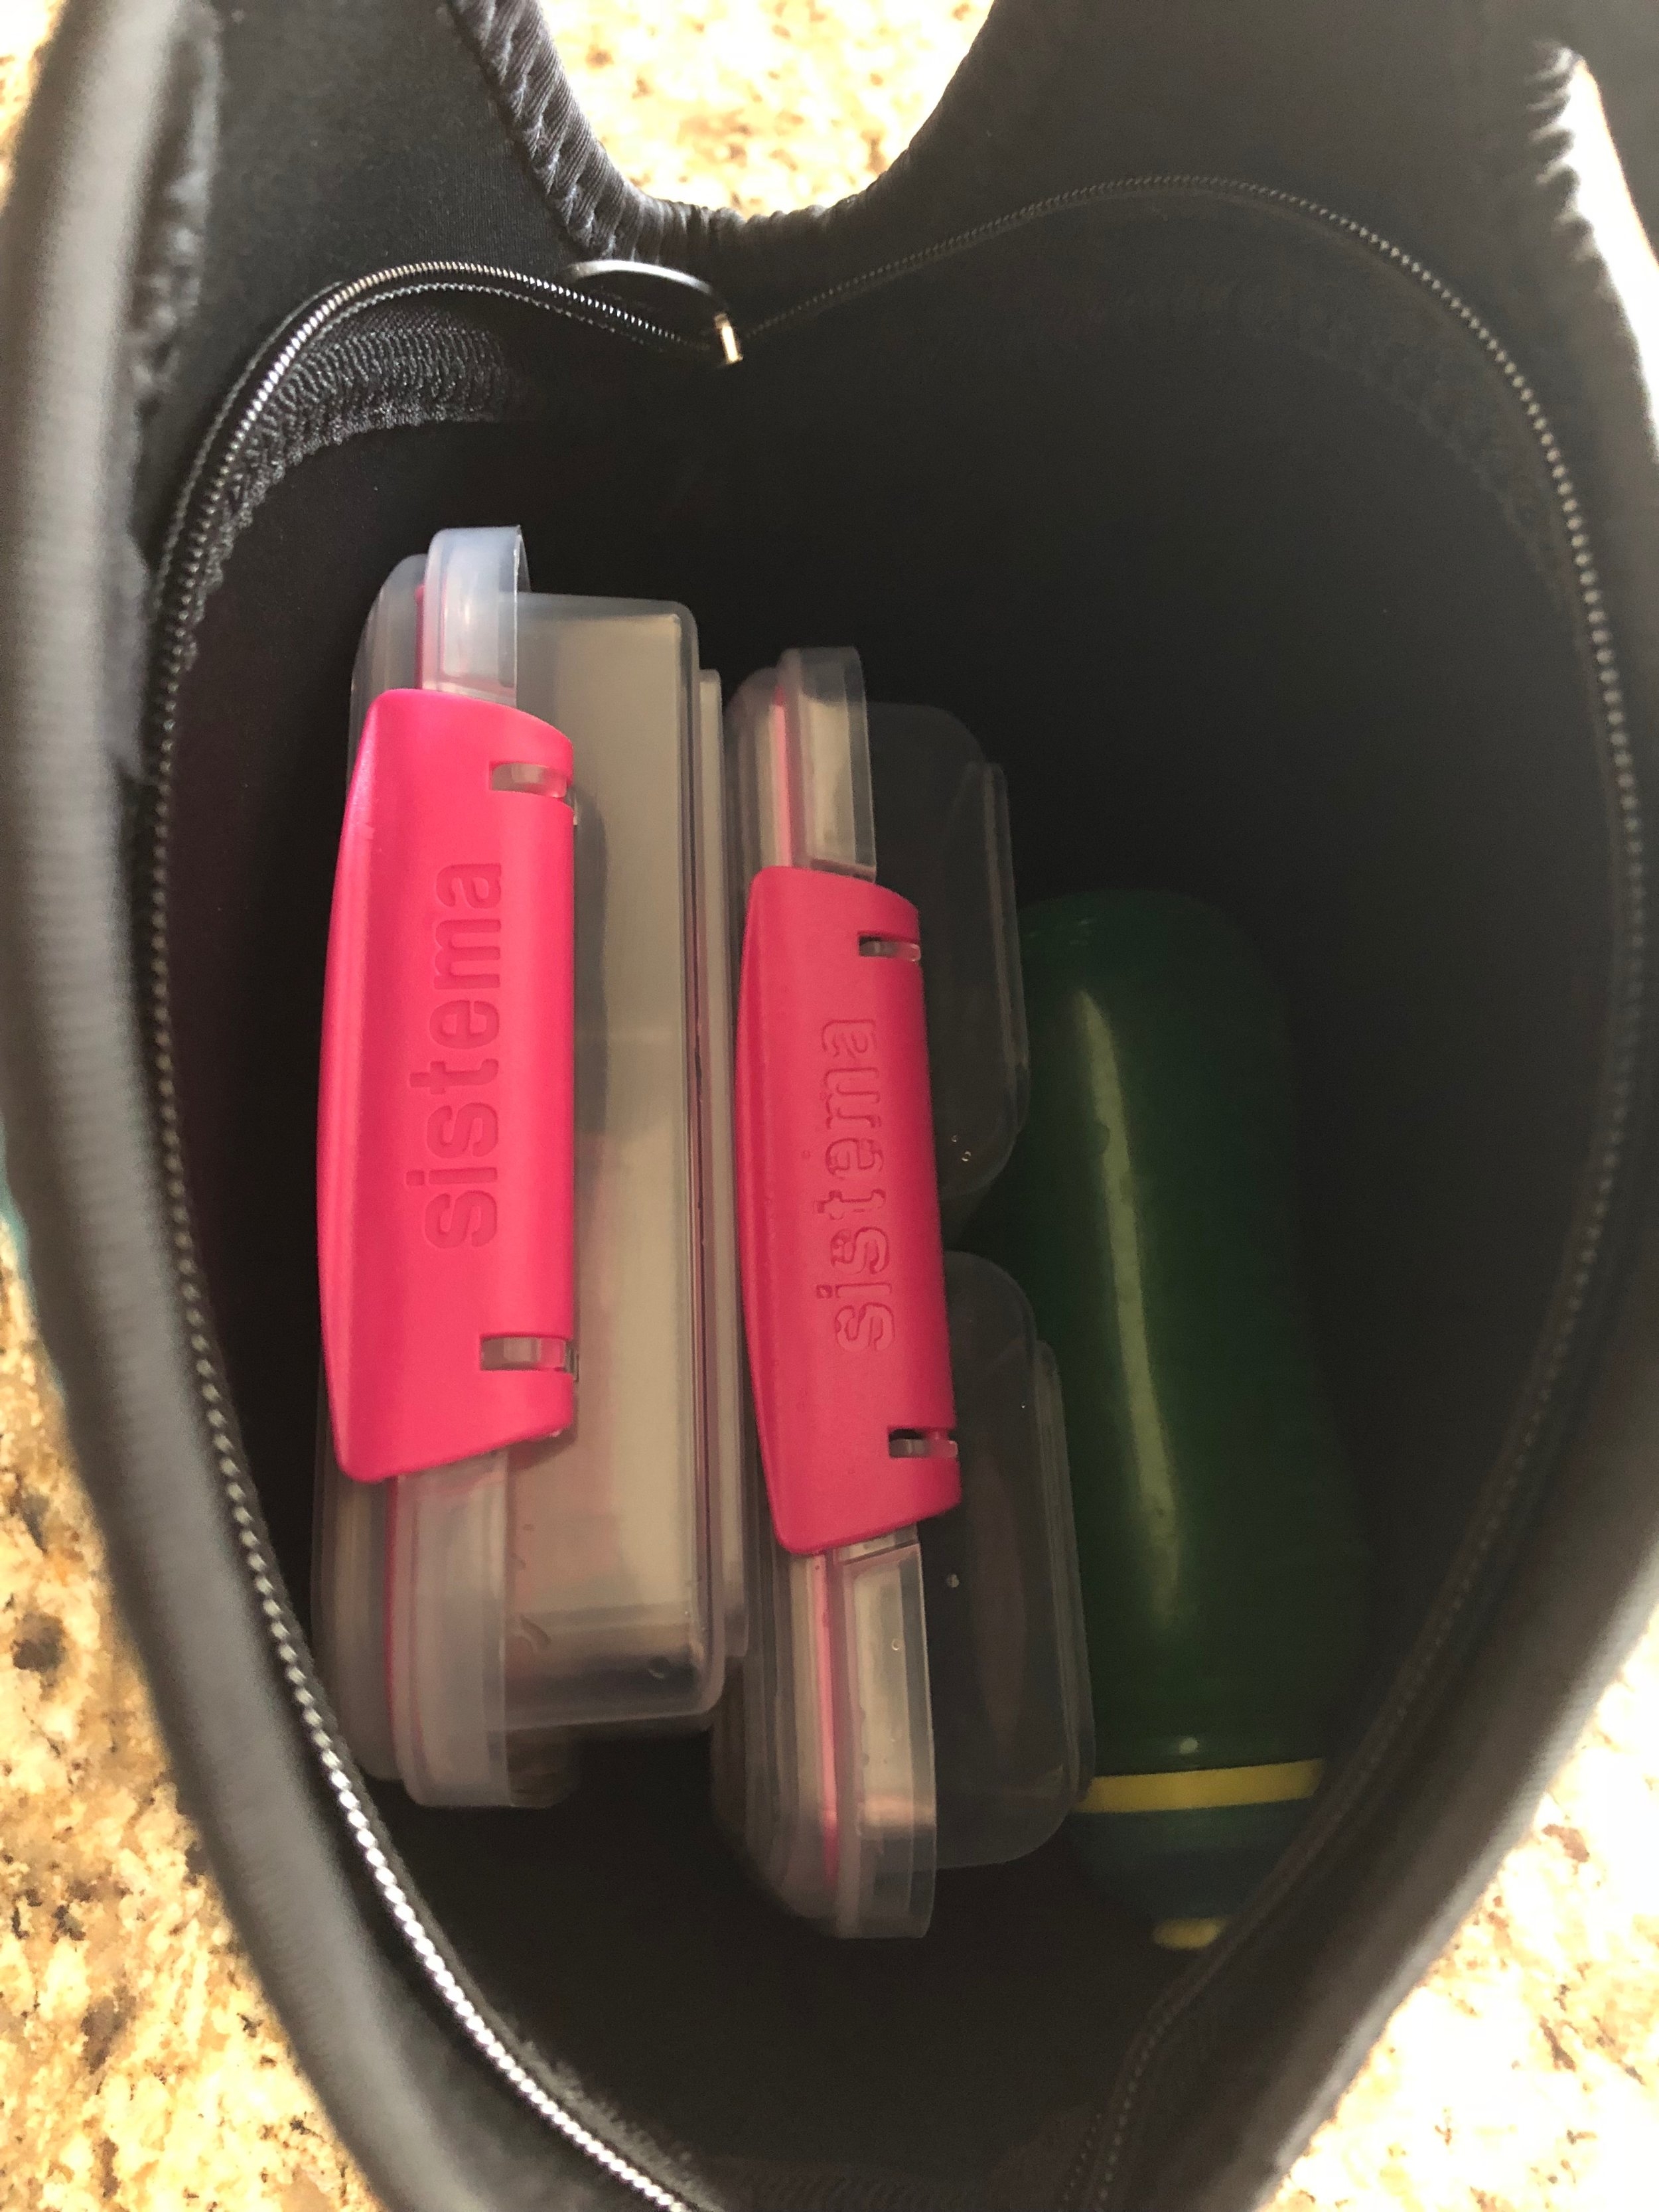 Keto and Low Carb back to School Lunch